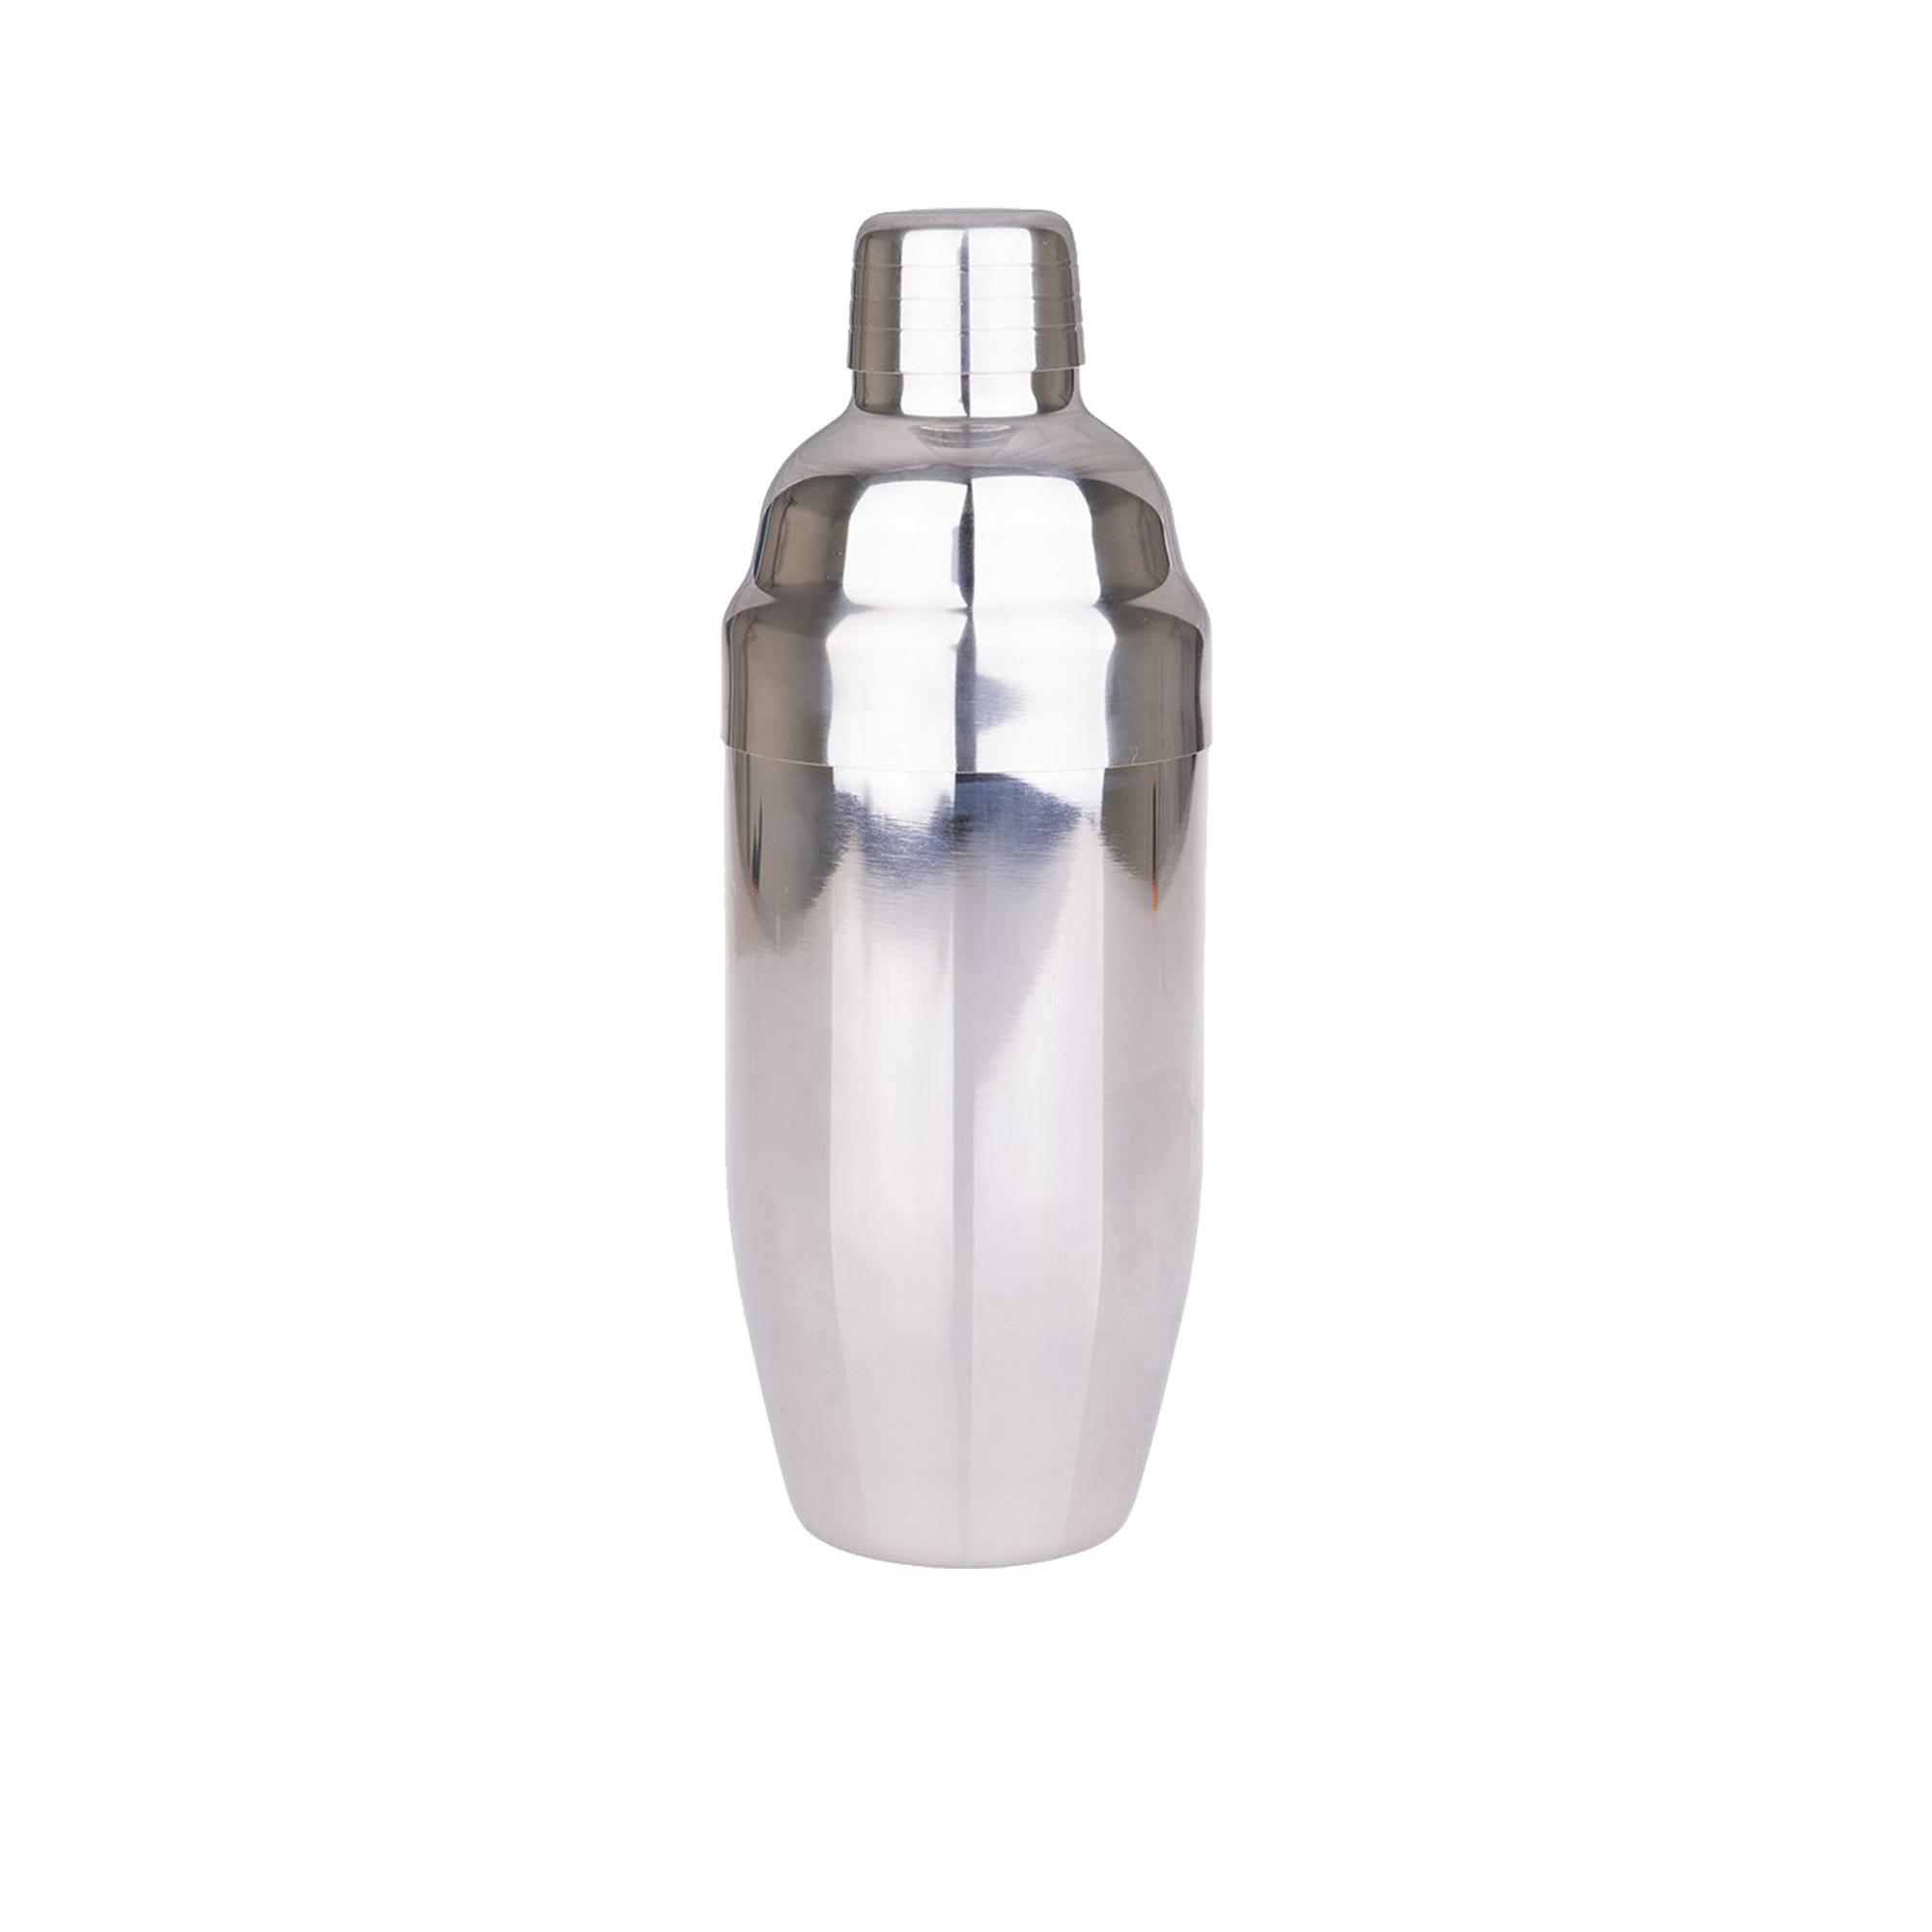 Bartender Stainless Steel Double Wall Cocktail Shaker 500ml Image 1